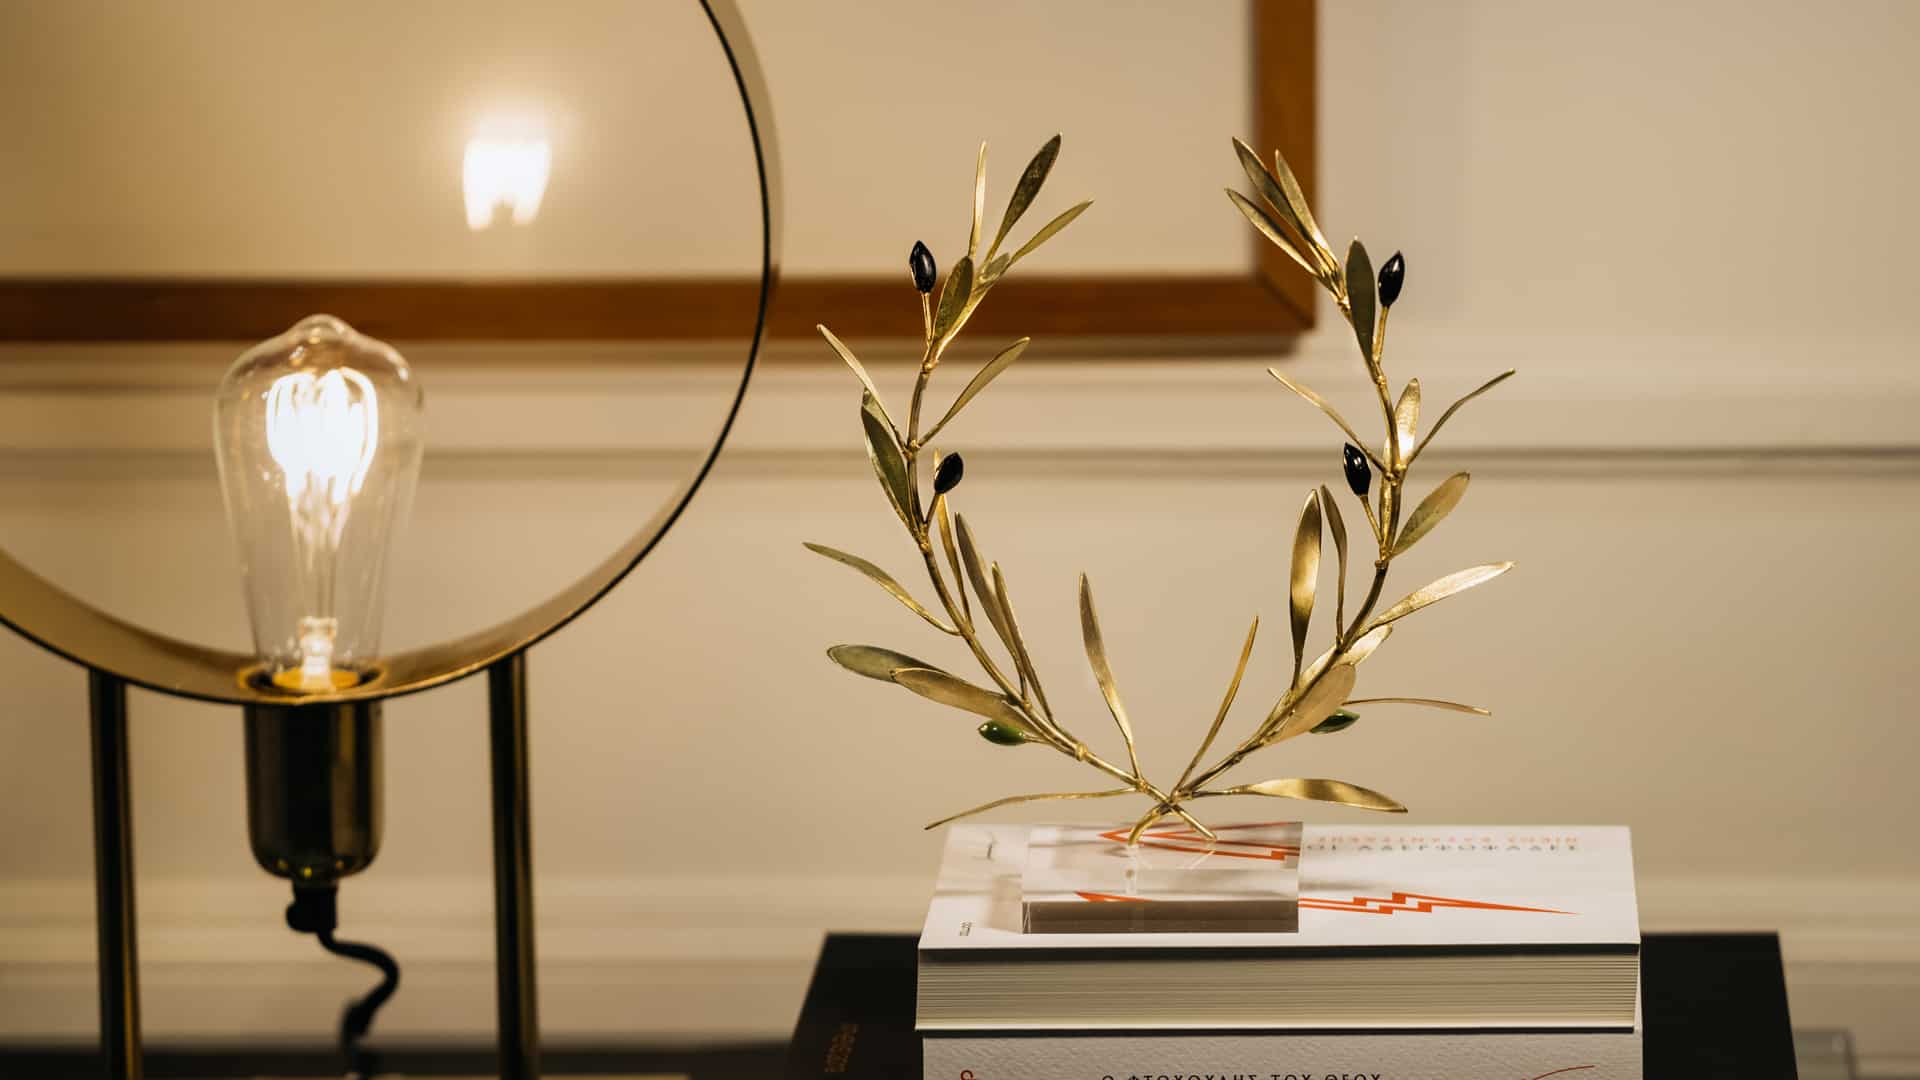 olive branch sculpture on books